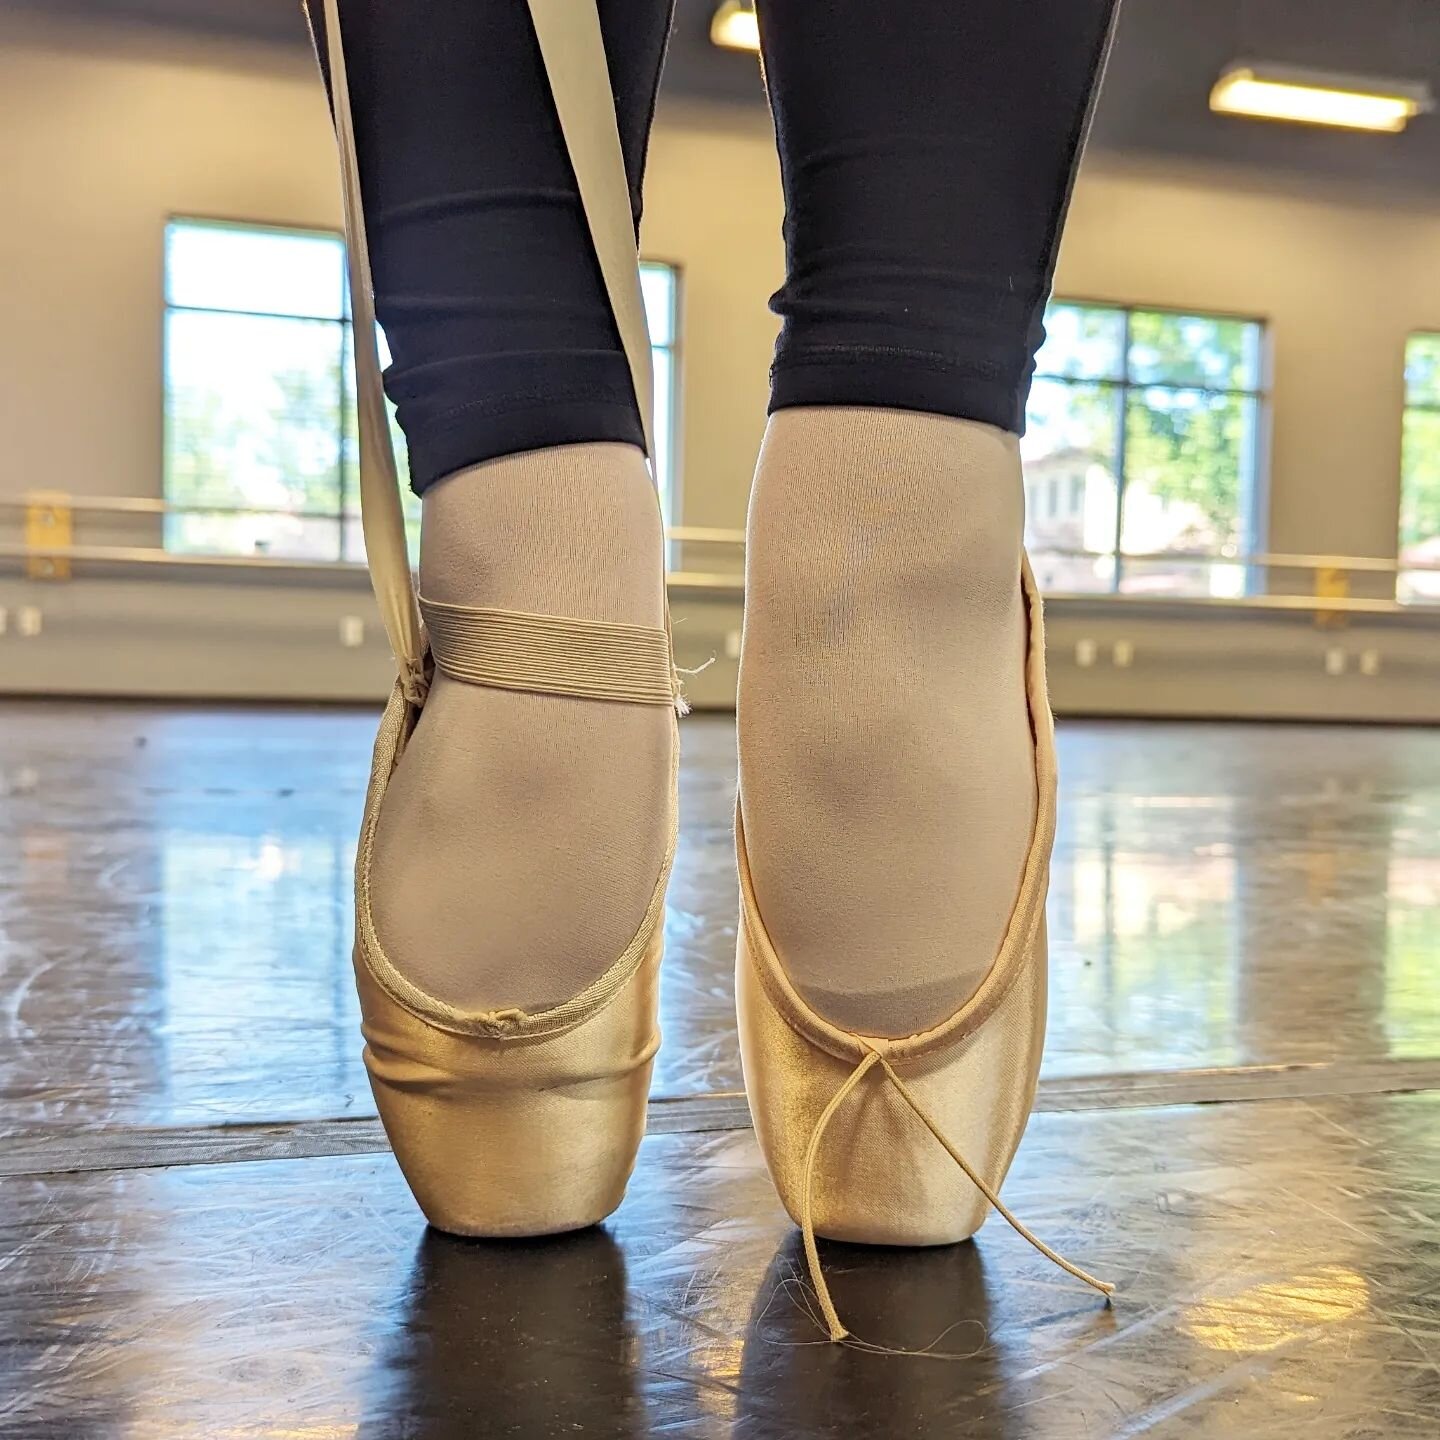 The right shoe can make all the difference... 🩰

I really could not believe this dancer was actually fit in the shoe on the left. Her foot is not sitting in the box properly, causing twisting within the box and shank. Her toes did not touch the bott